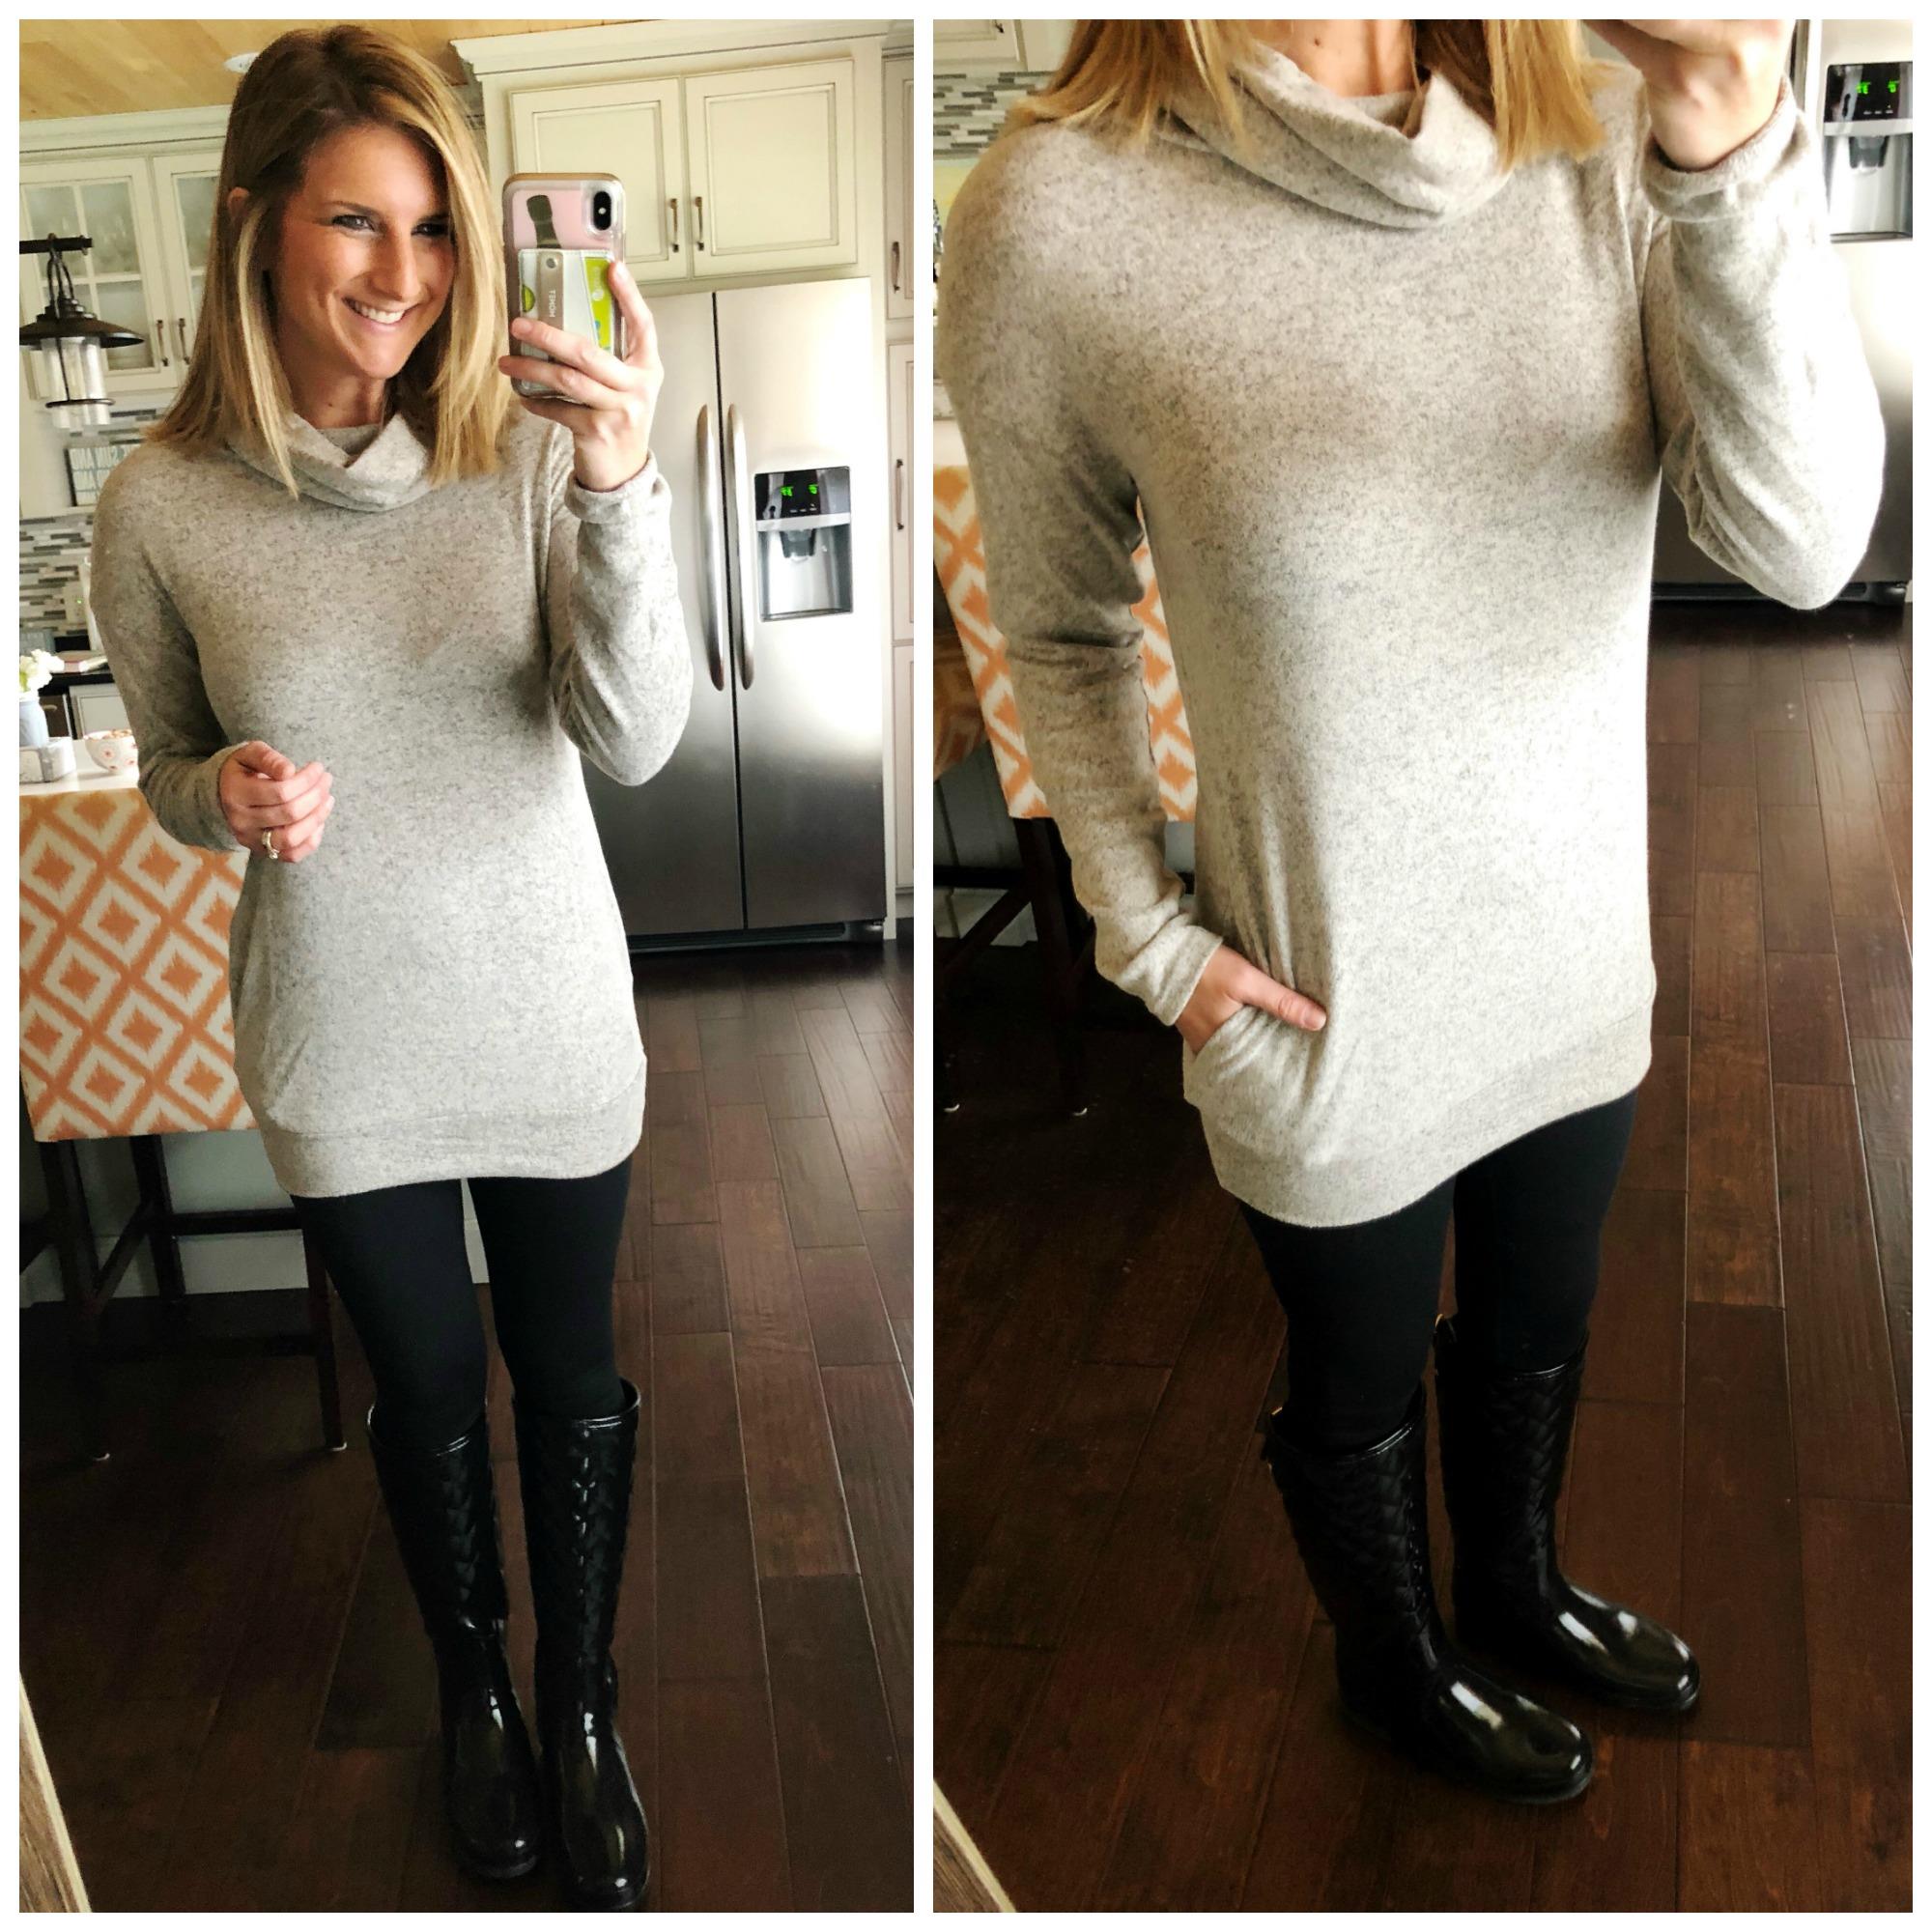 Cowl Neck Tunic // Turtleneck Tunic Sweater // Spanx Leggings // Zella Leggings // Hunter Boots // Quilted Hunter Boots // Tunic Sweater and Leggings 